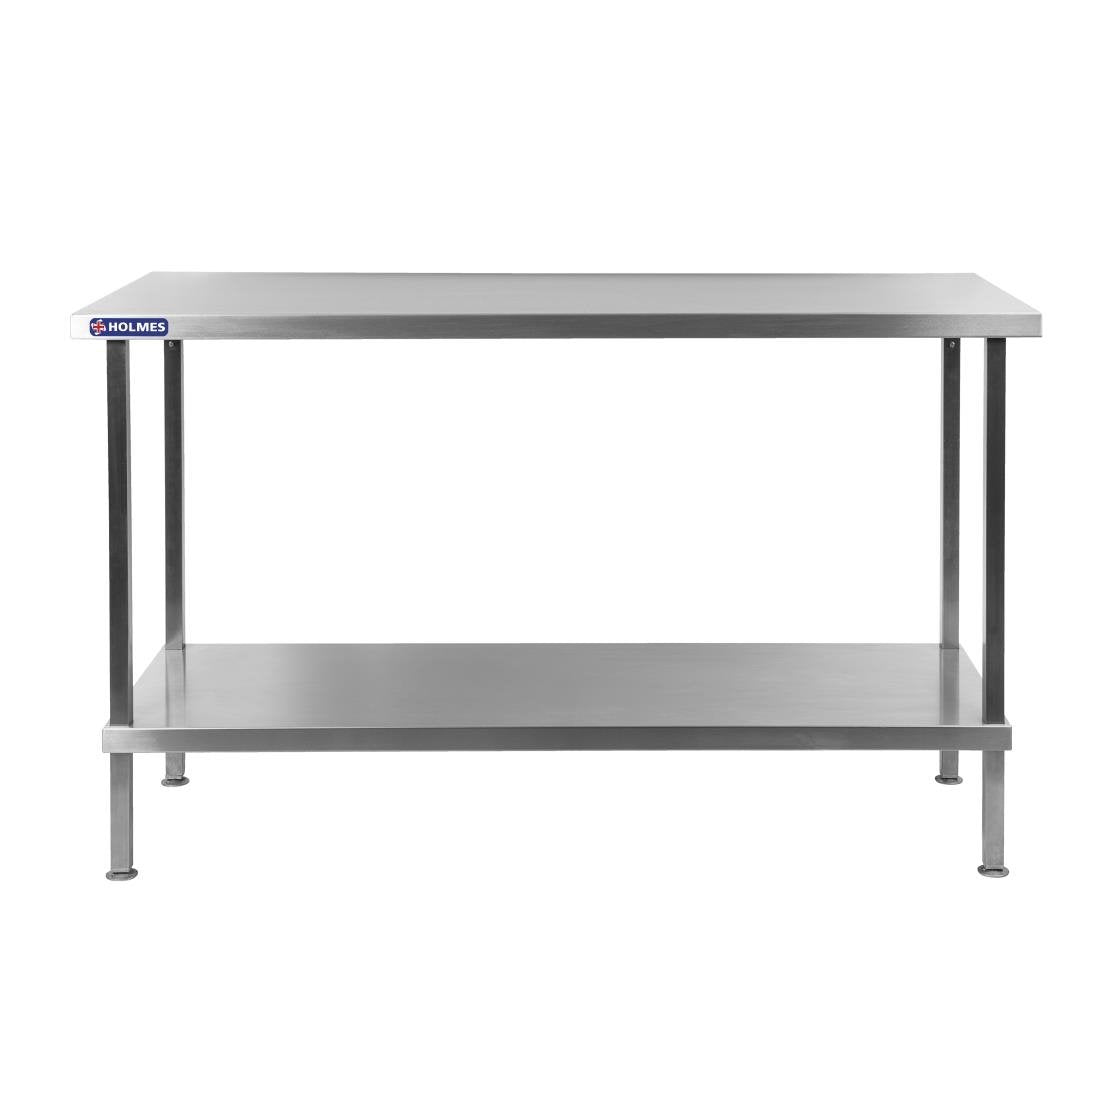 DR046 Holmes Stainless Steel Centre Table 2100mm JD Catering Equipment Solutions Ltd